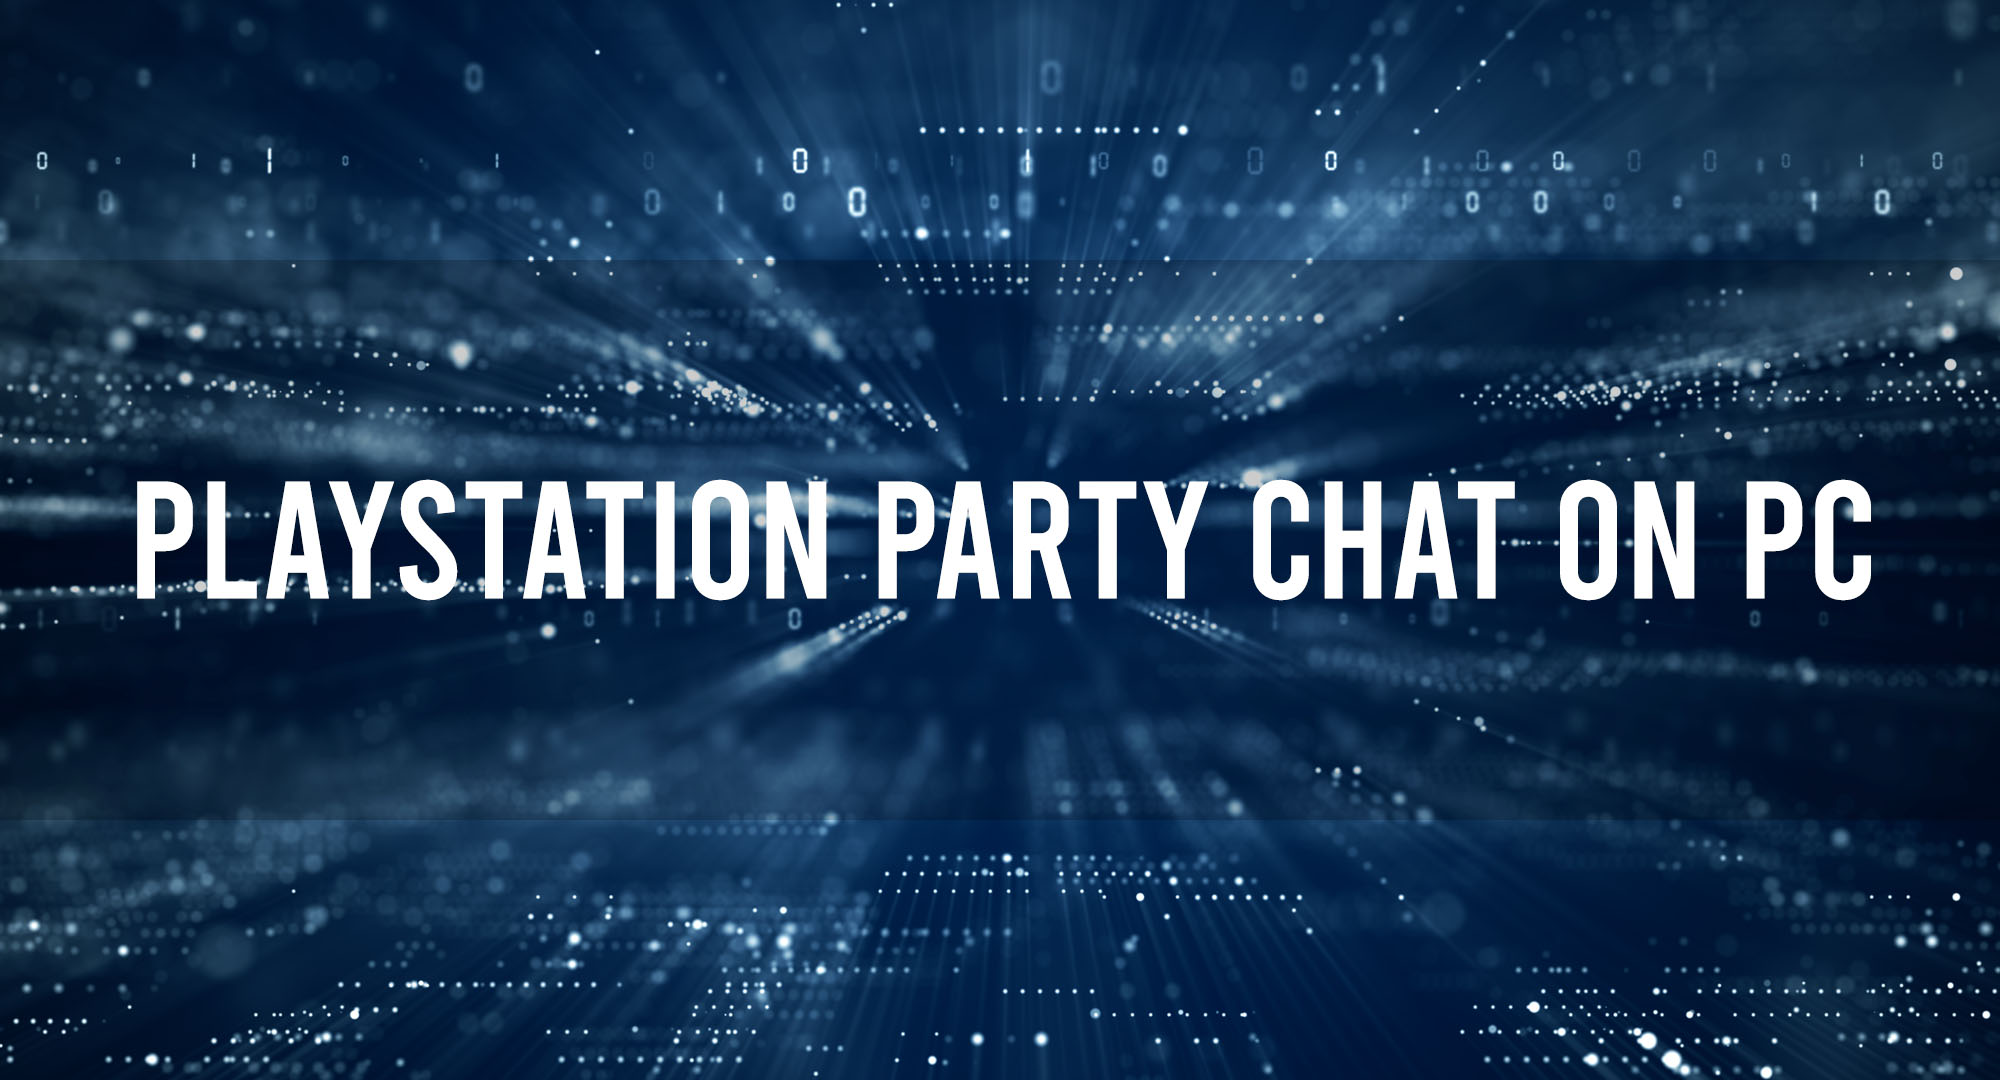 Playstation Party Chat On PC